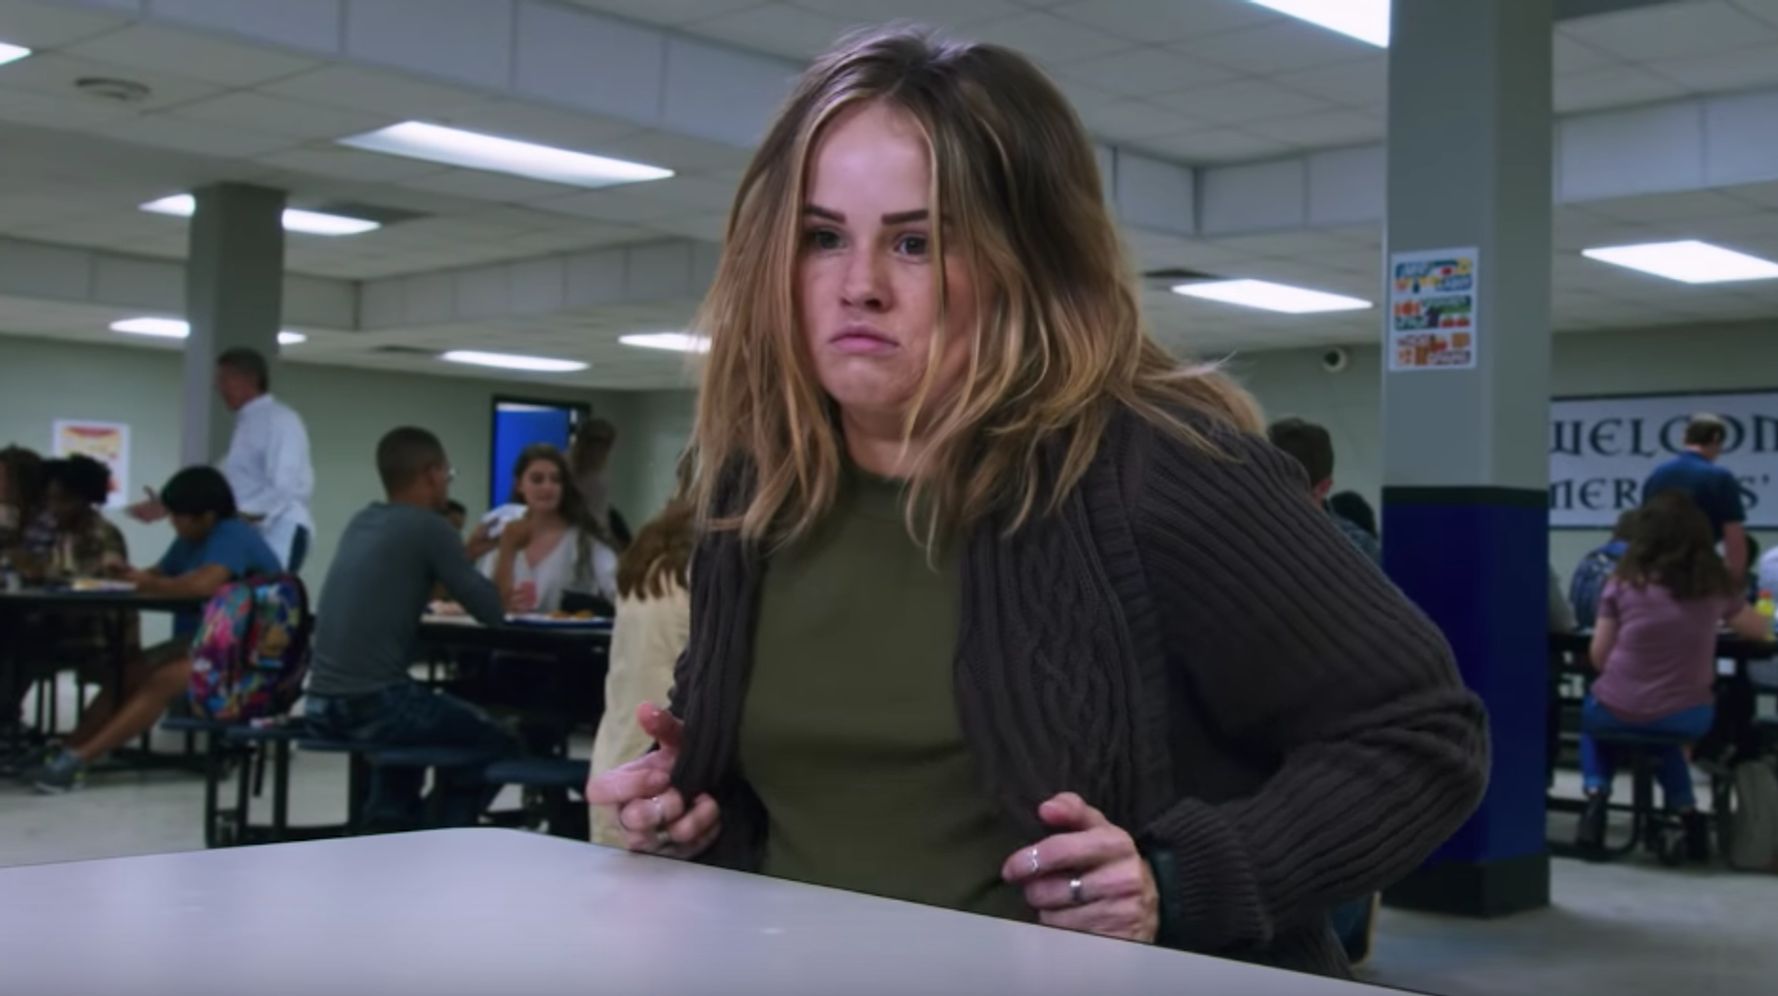 Debby Ryan Ass Porn - Netflix's 'Insatiable' Cast Members Respond To Accusations Of Fat-Shaming |  HuffPost UK Entertainment